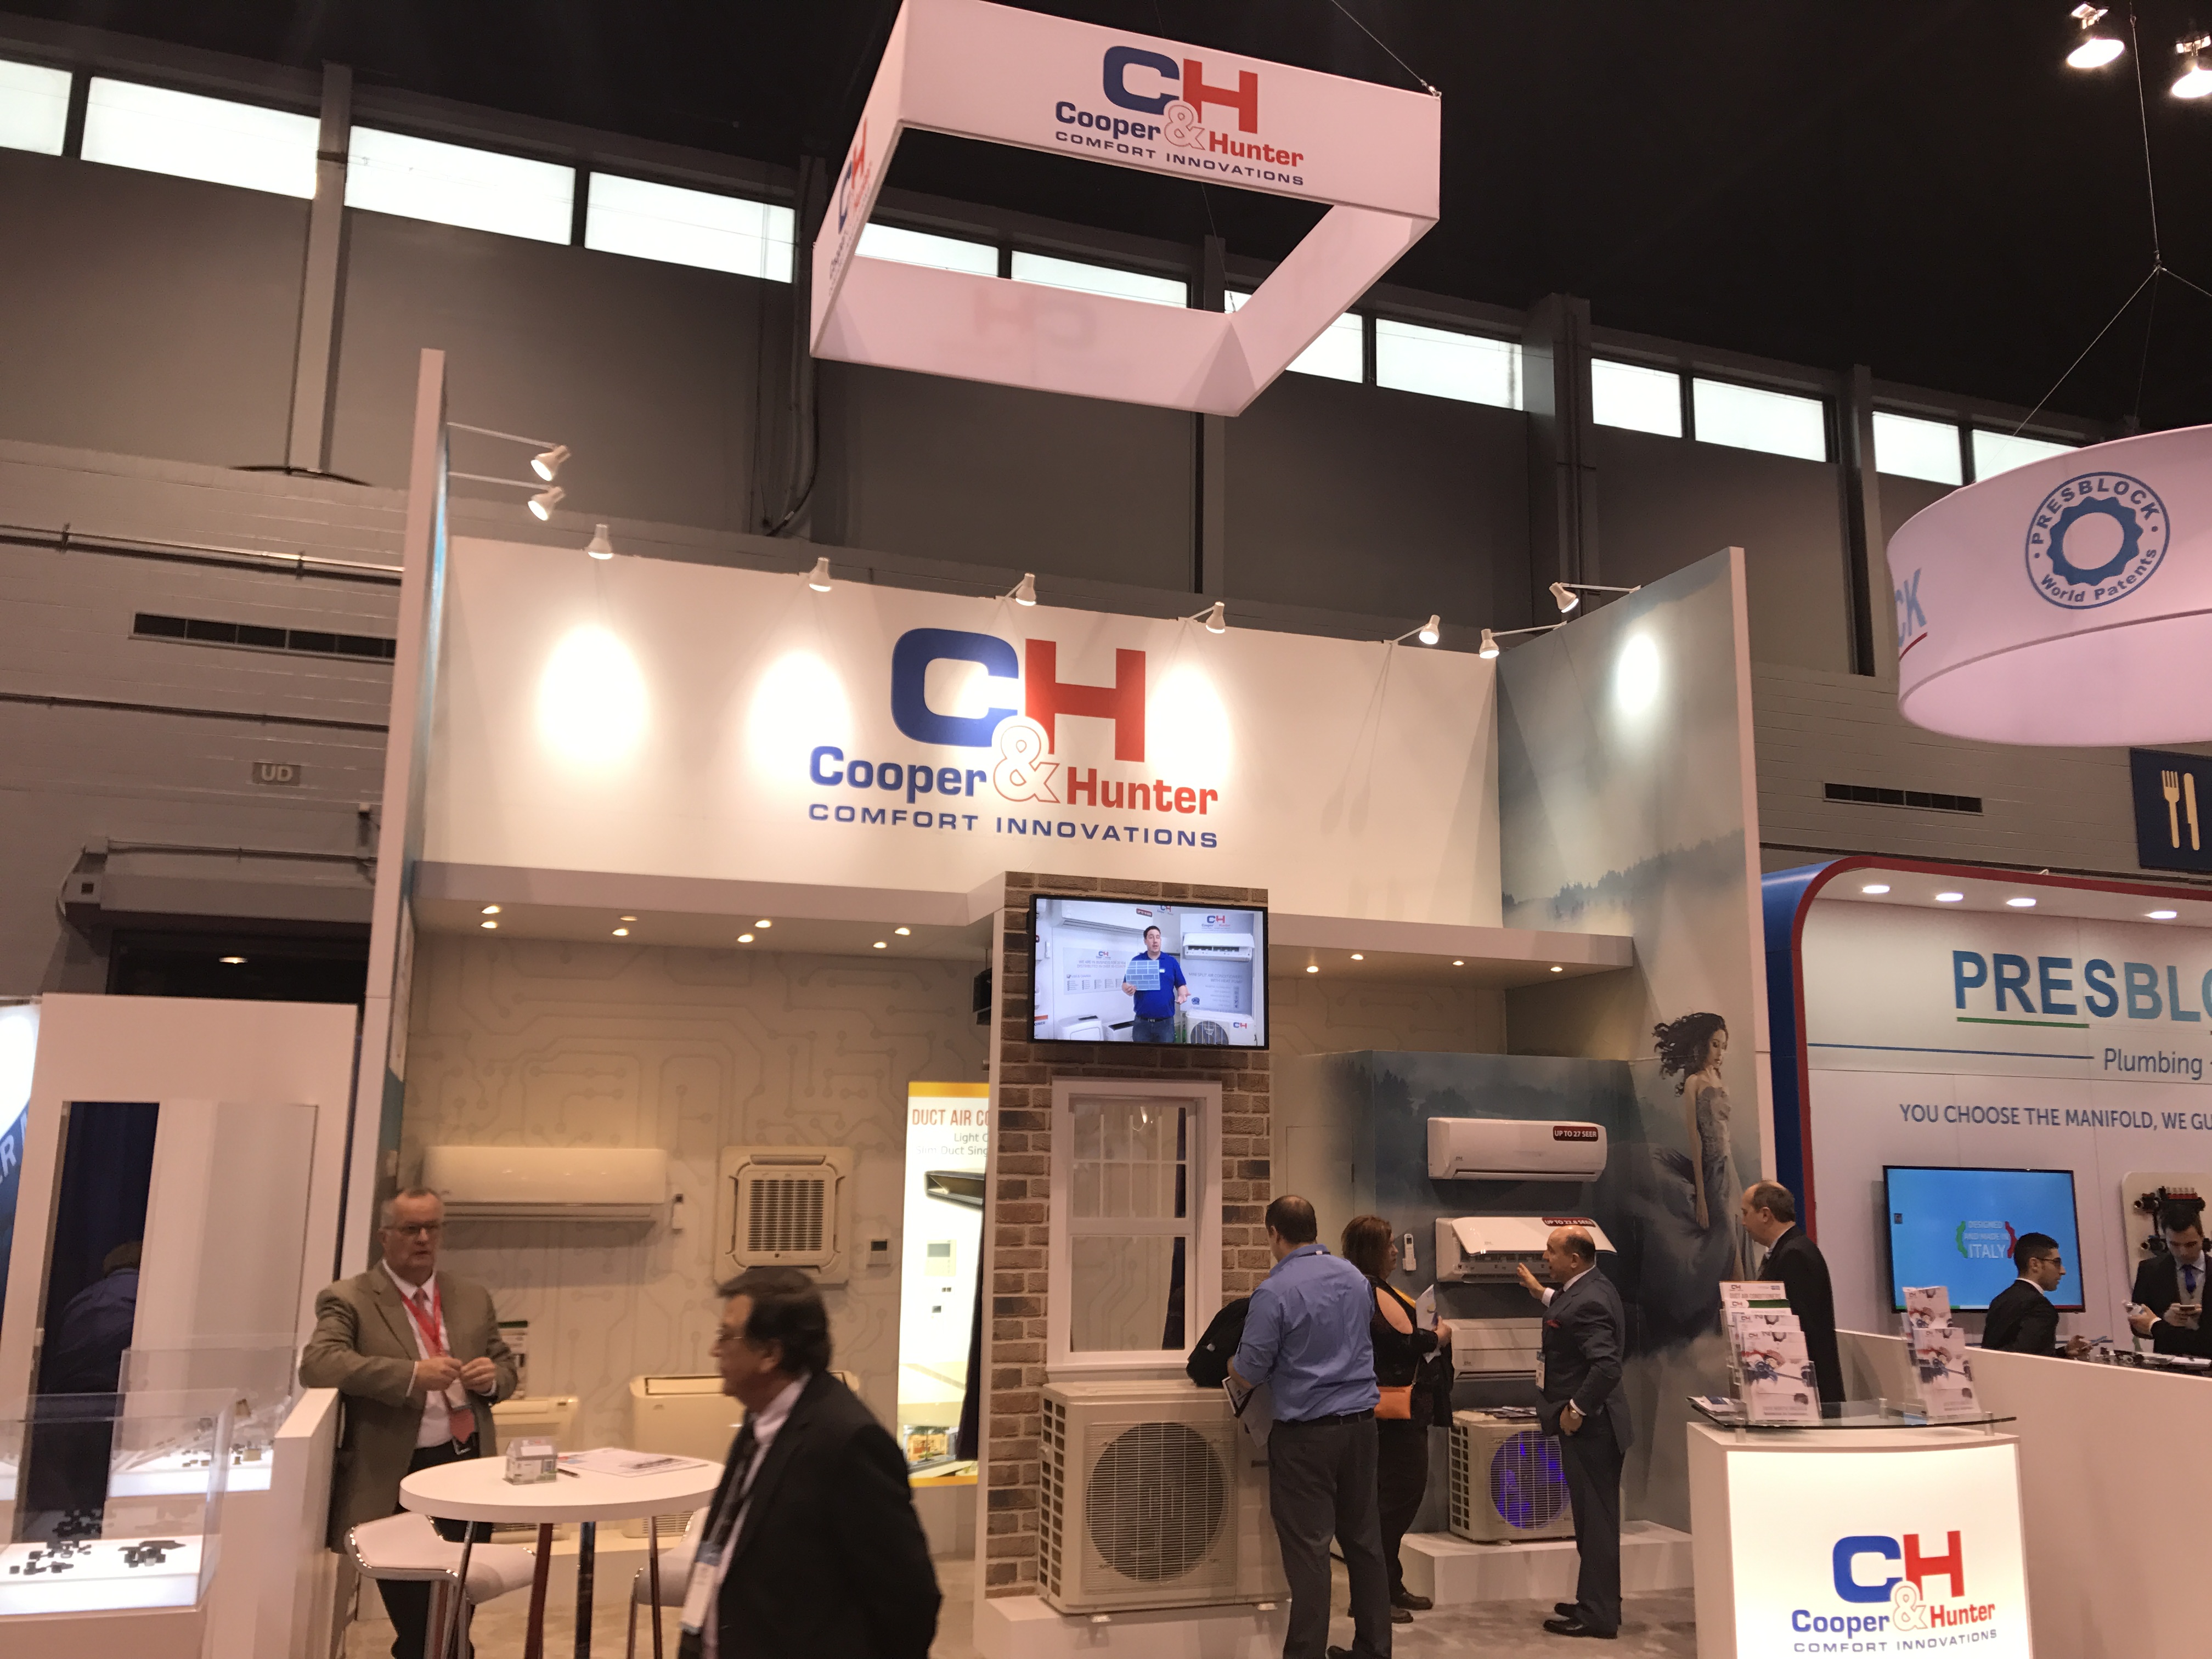 Cooper&Hunter_Booth_At_AHR_Expo_2018 (1) COOPER&HUNTER